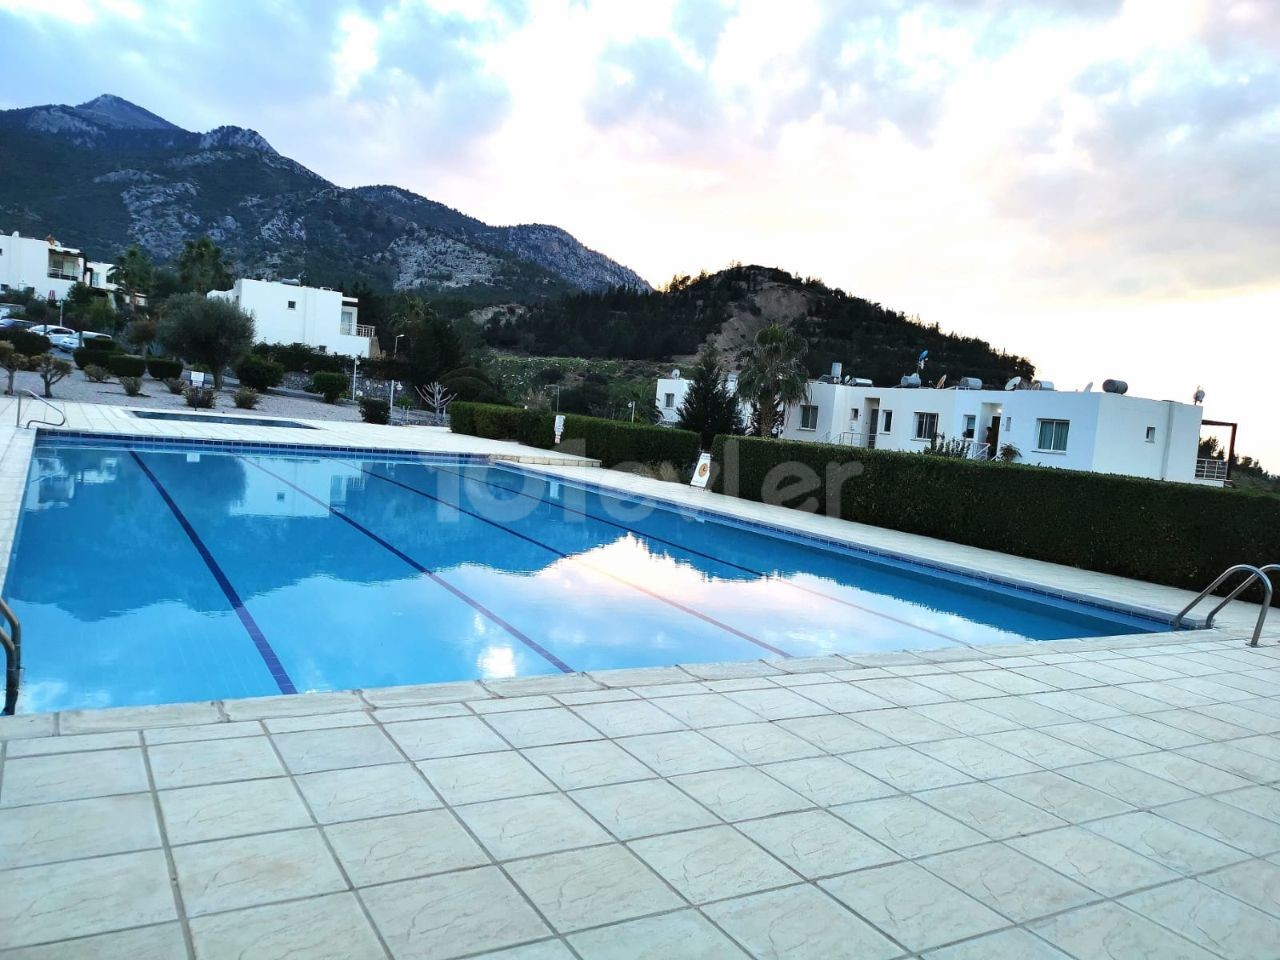 2 Bedroom Unfurnished Penthouse Apartment  with shared pool + Incredible Panoramic Sea and Mountain Views On This Well Maintained Development